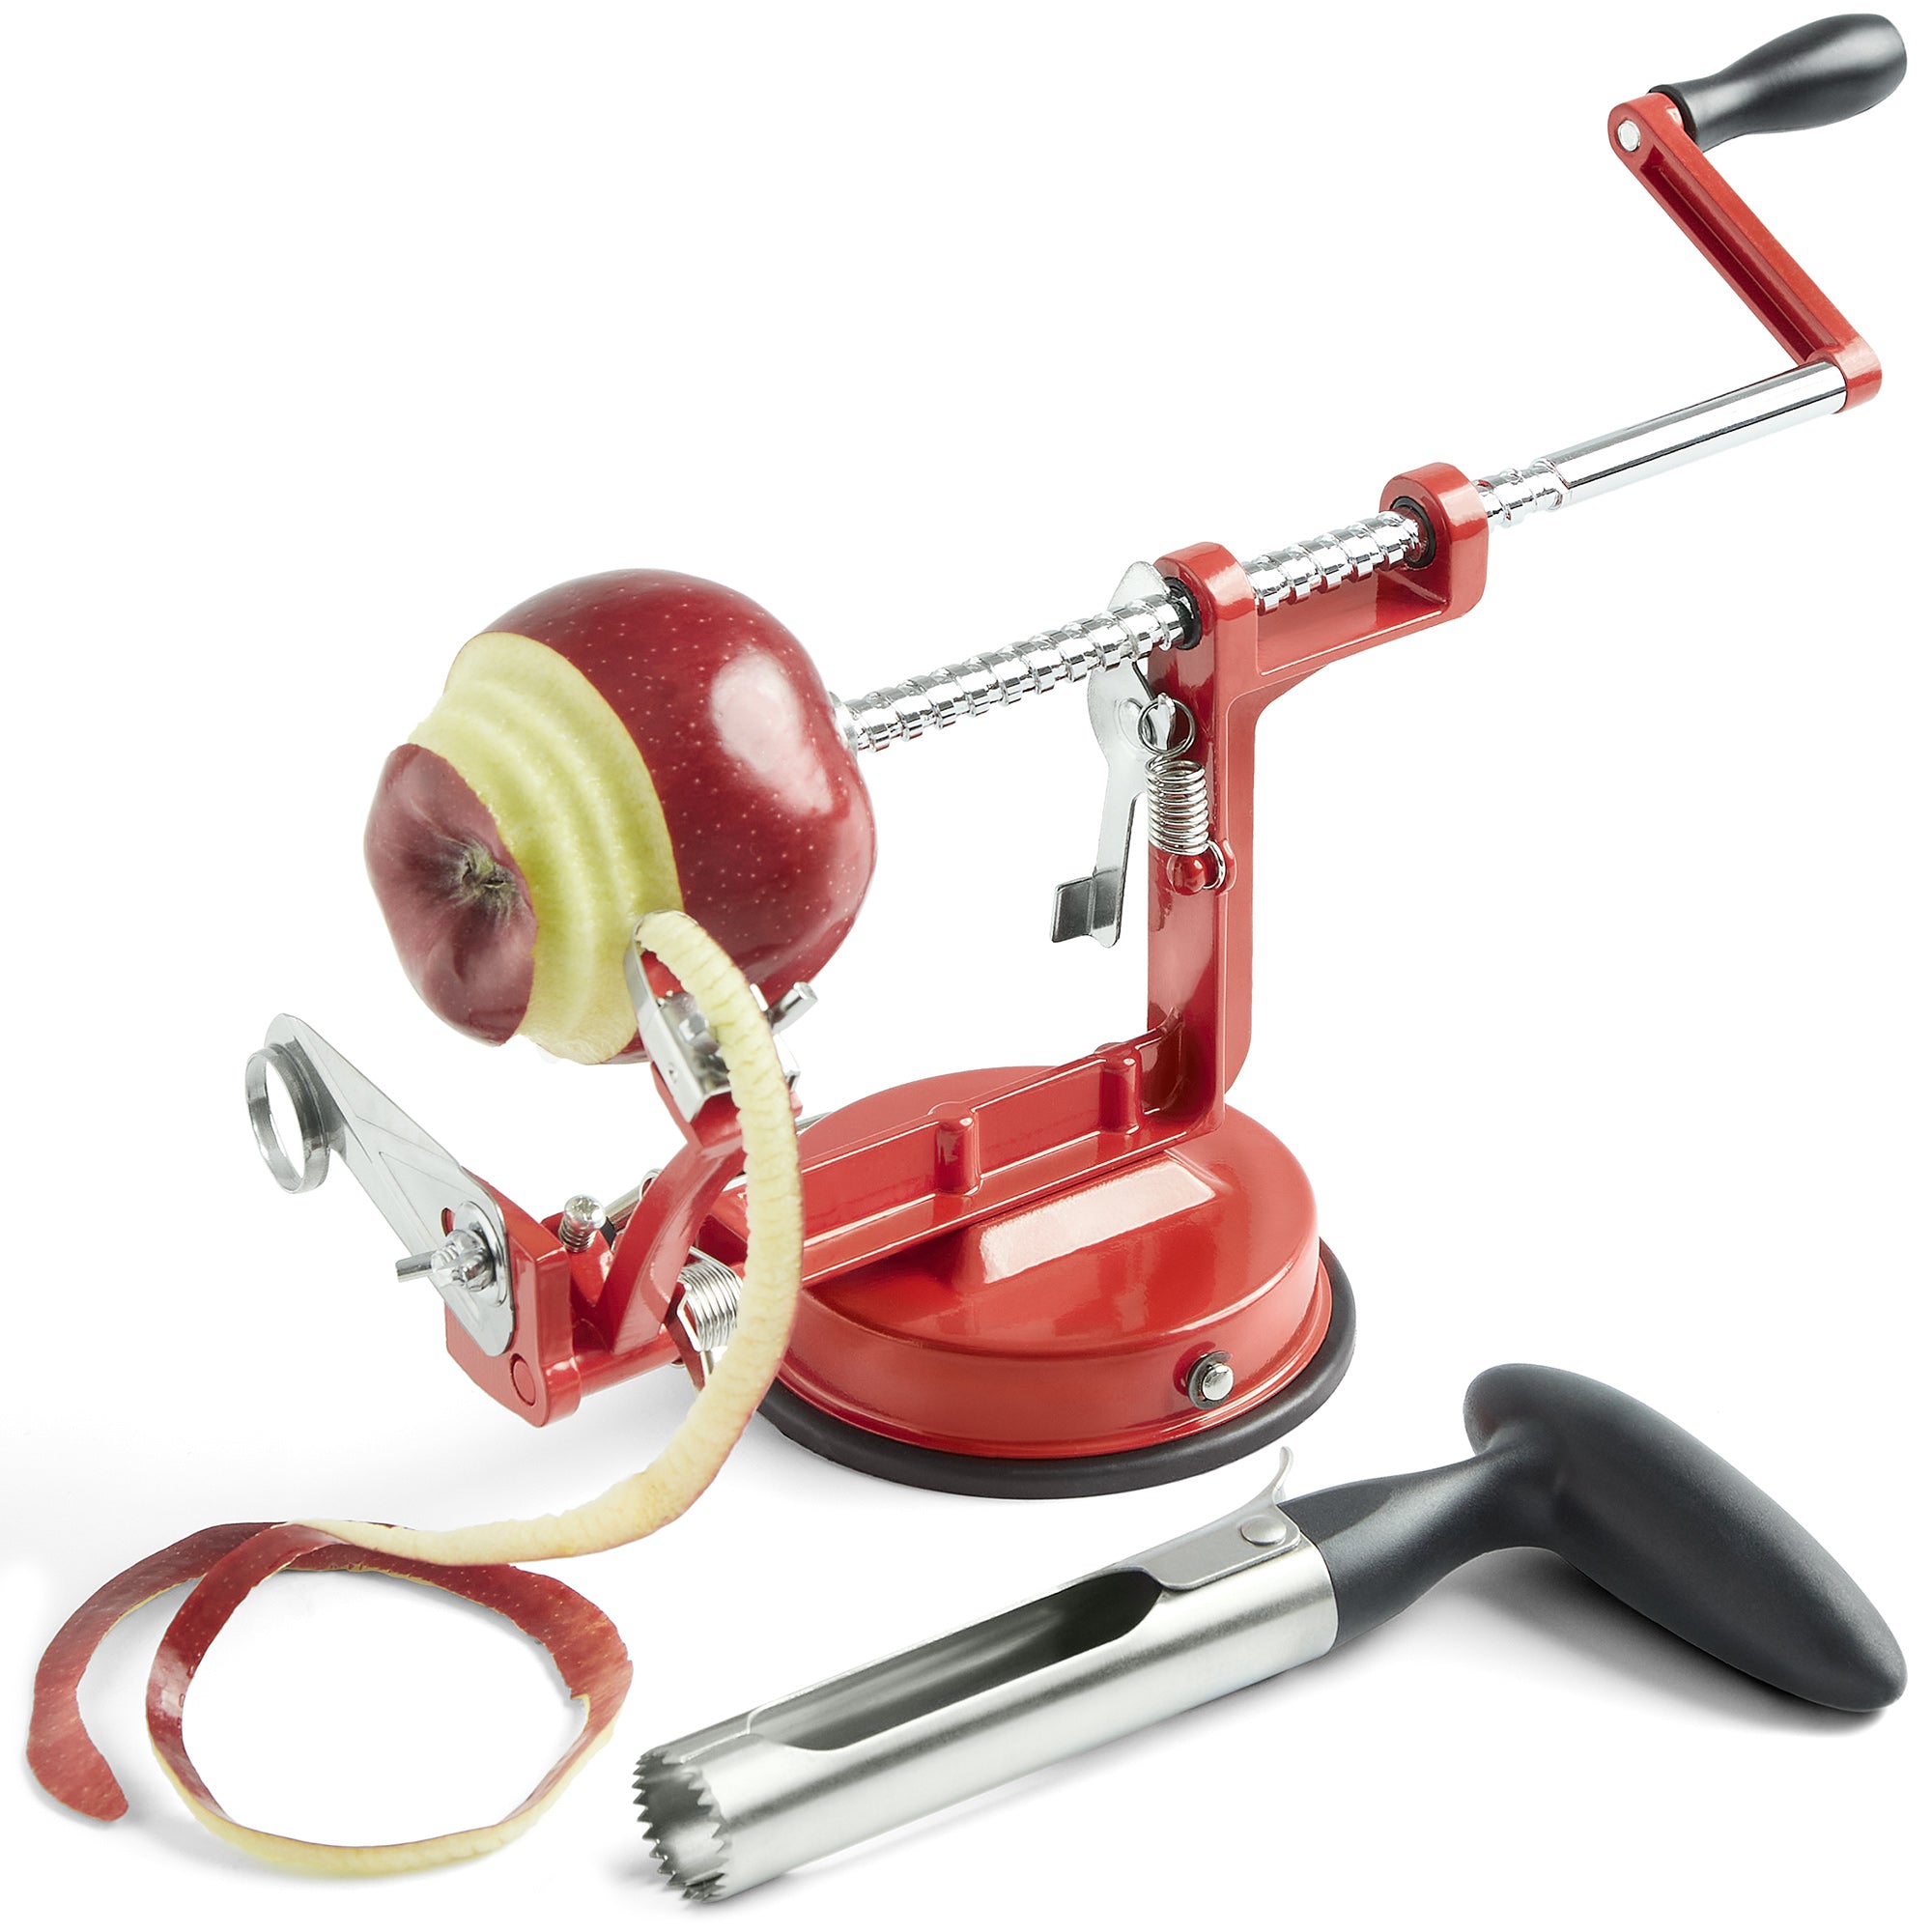 This Old-Fashioned Apple Peeler Is the Best Way to Peel Apples